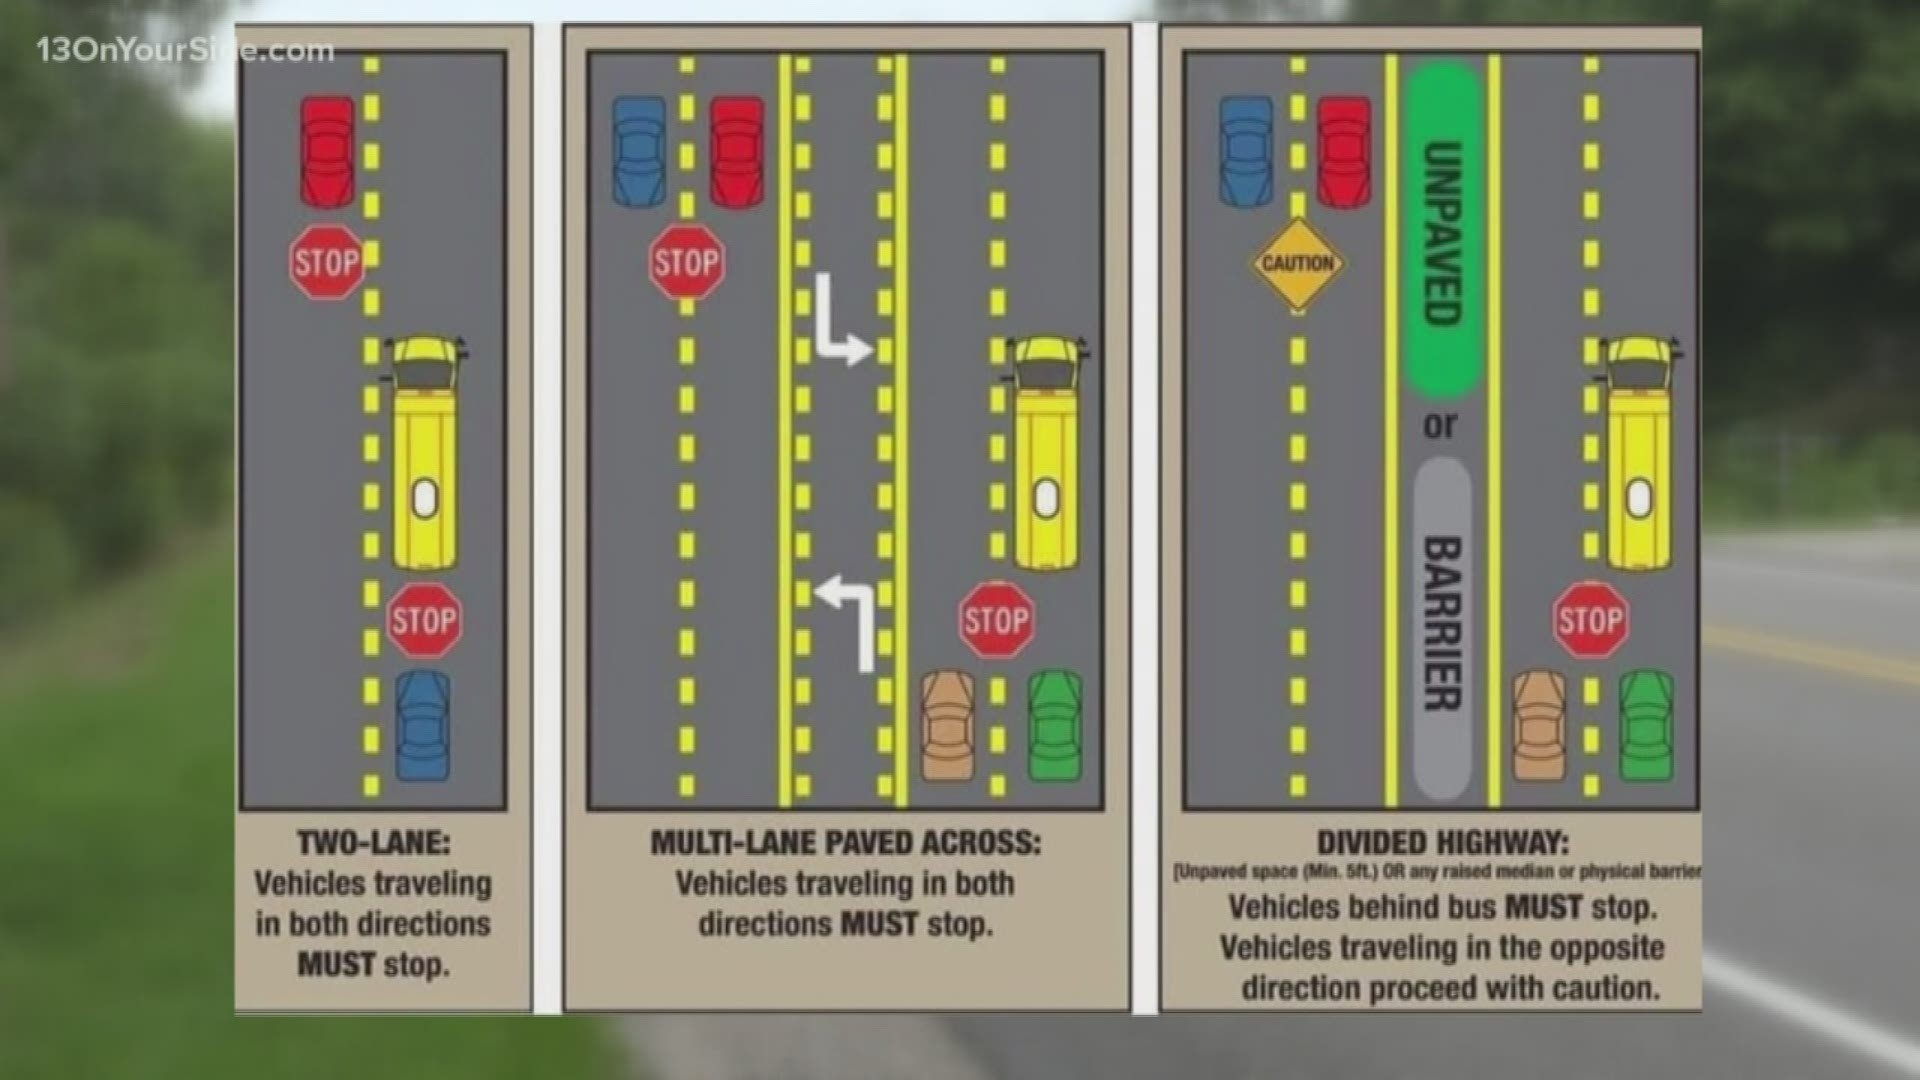 Michigan lawmakers are trying to put parents at ease by letting school districts put cameras on buses. They want this to help cut down on people driving past buses.